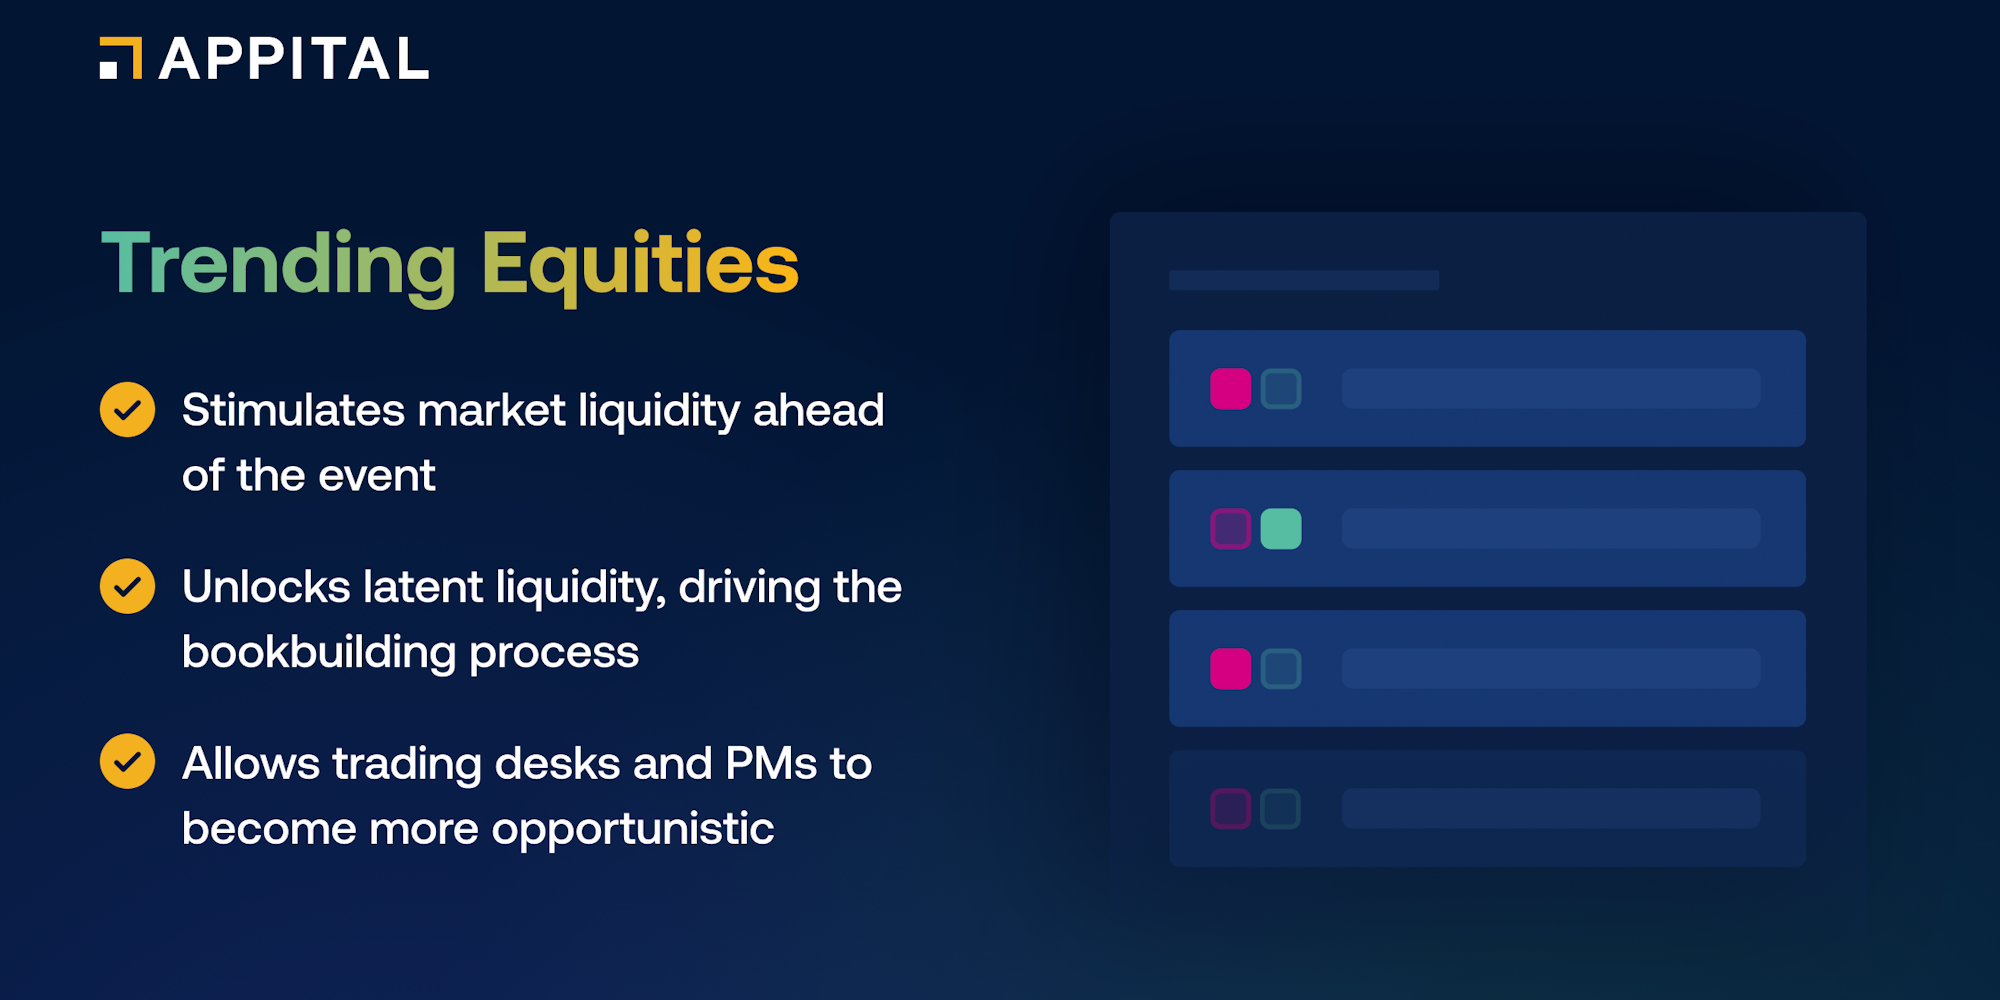 Appital launches ‘Trending Equities’ to drive opportunistic buyside liquidity